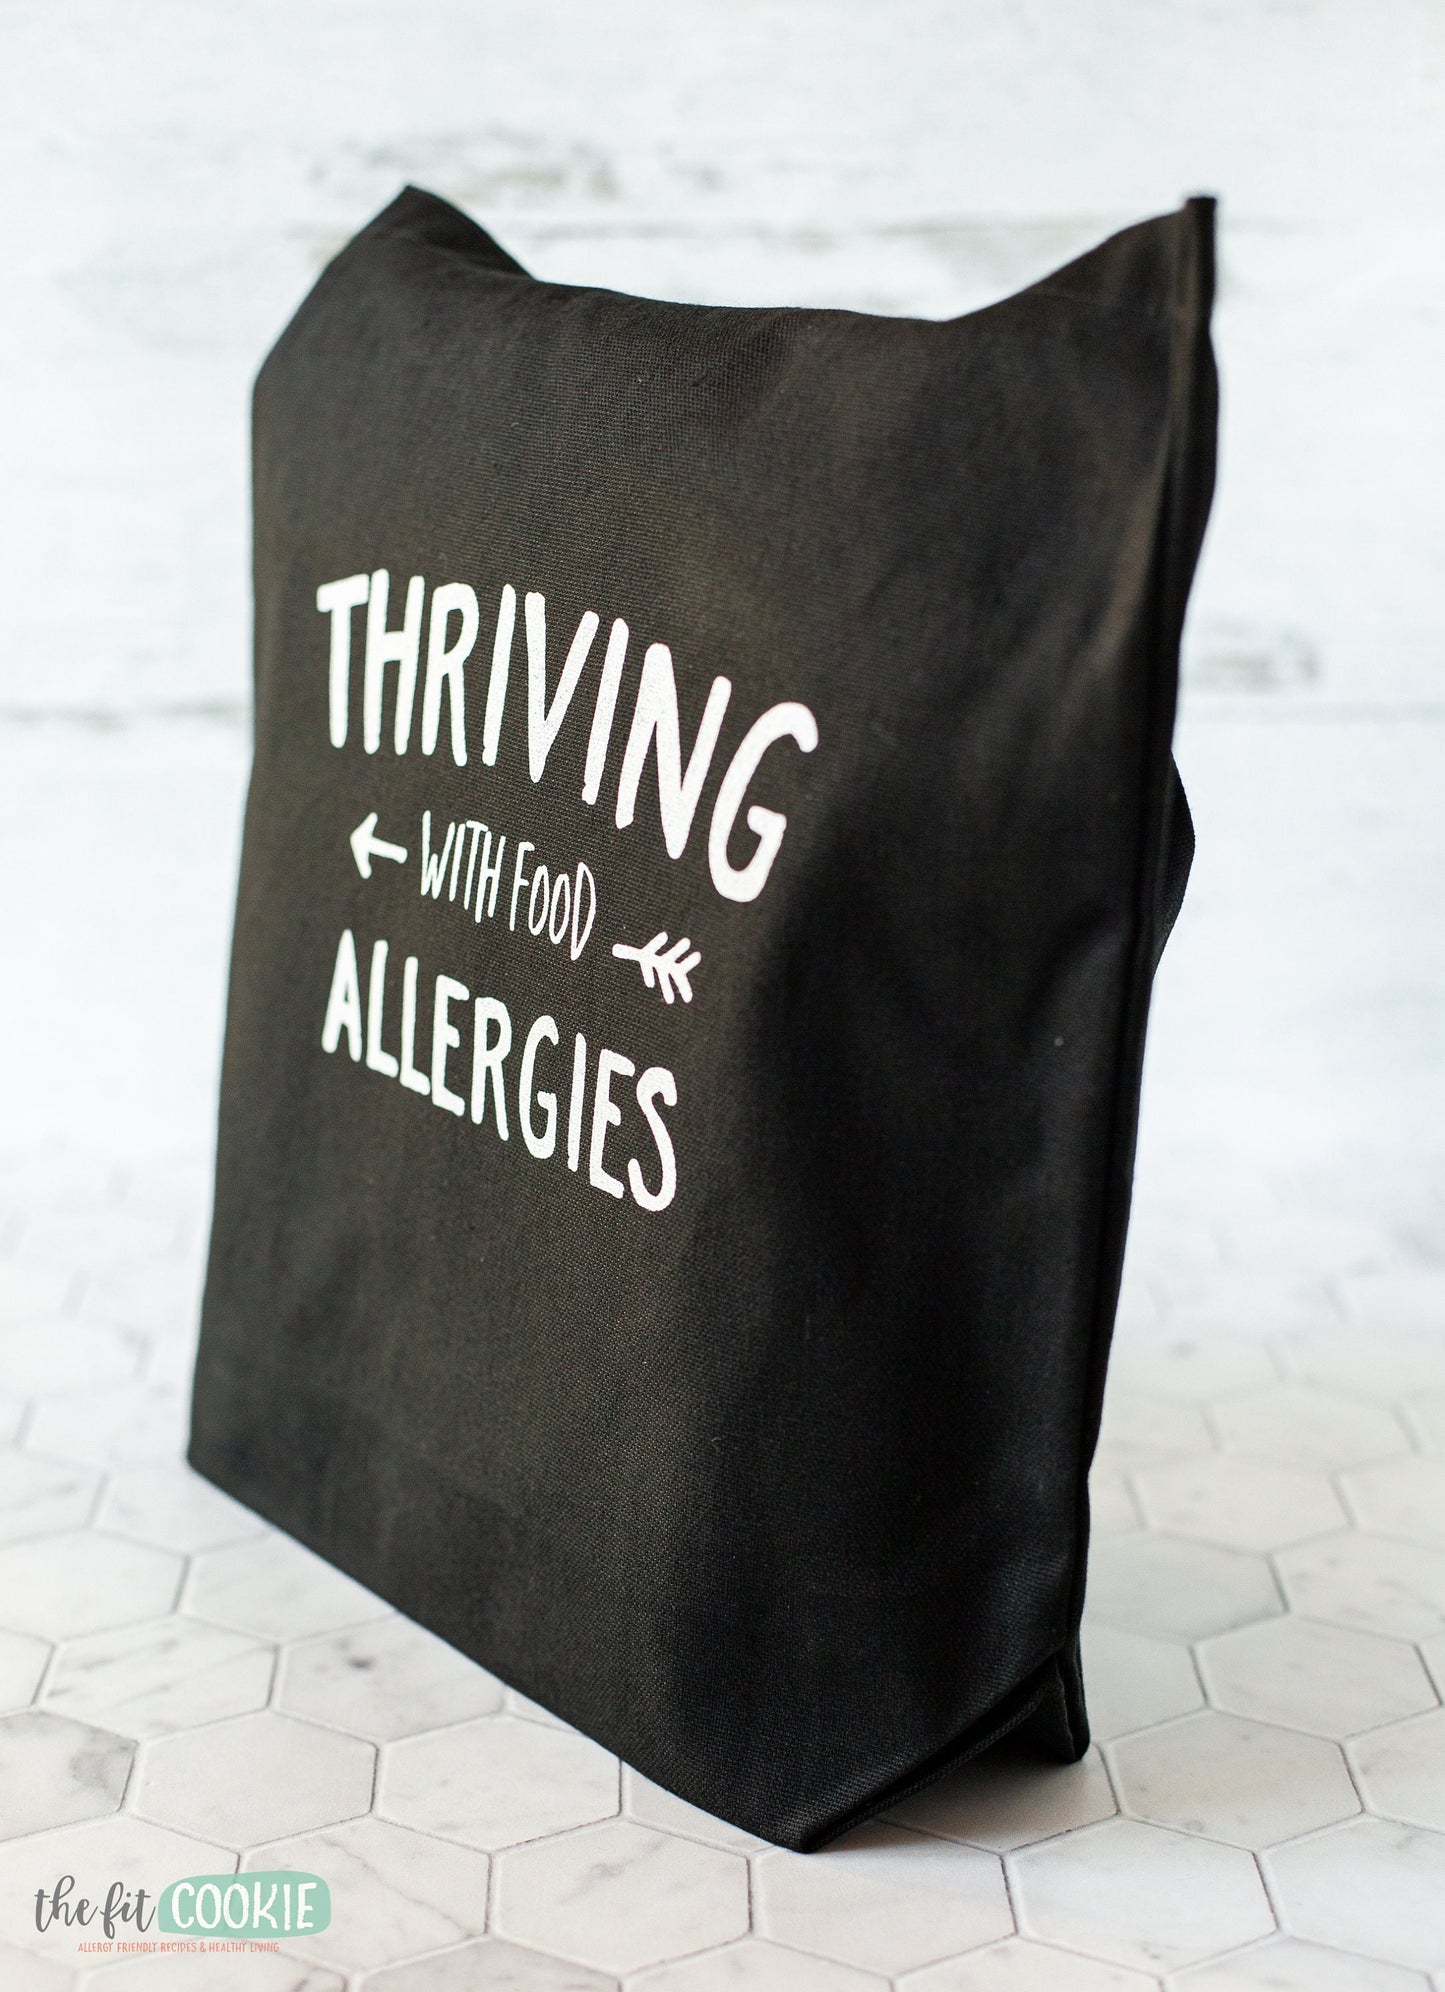 Thriving with Food Allergies Small Tote Bag